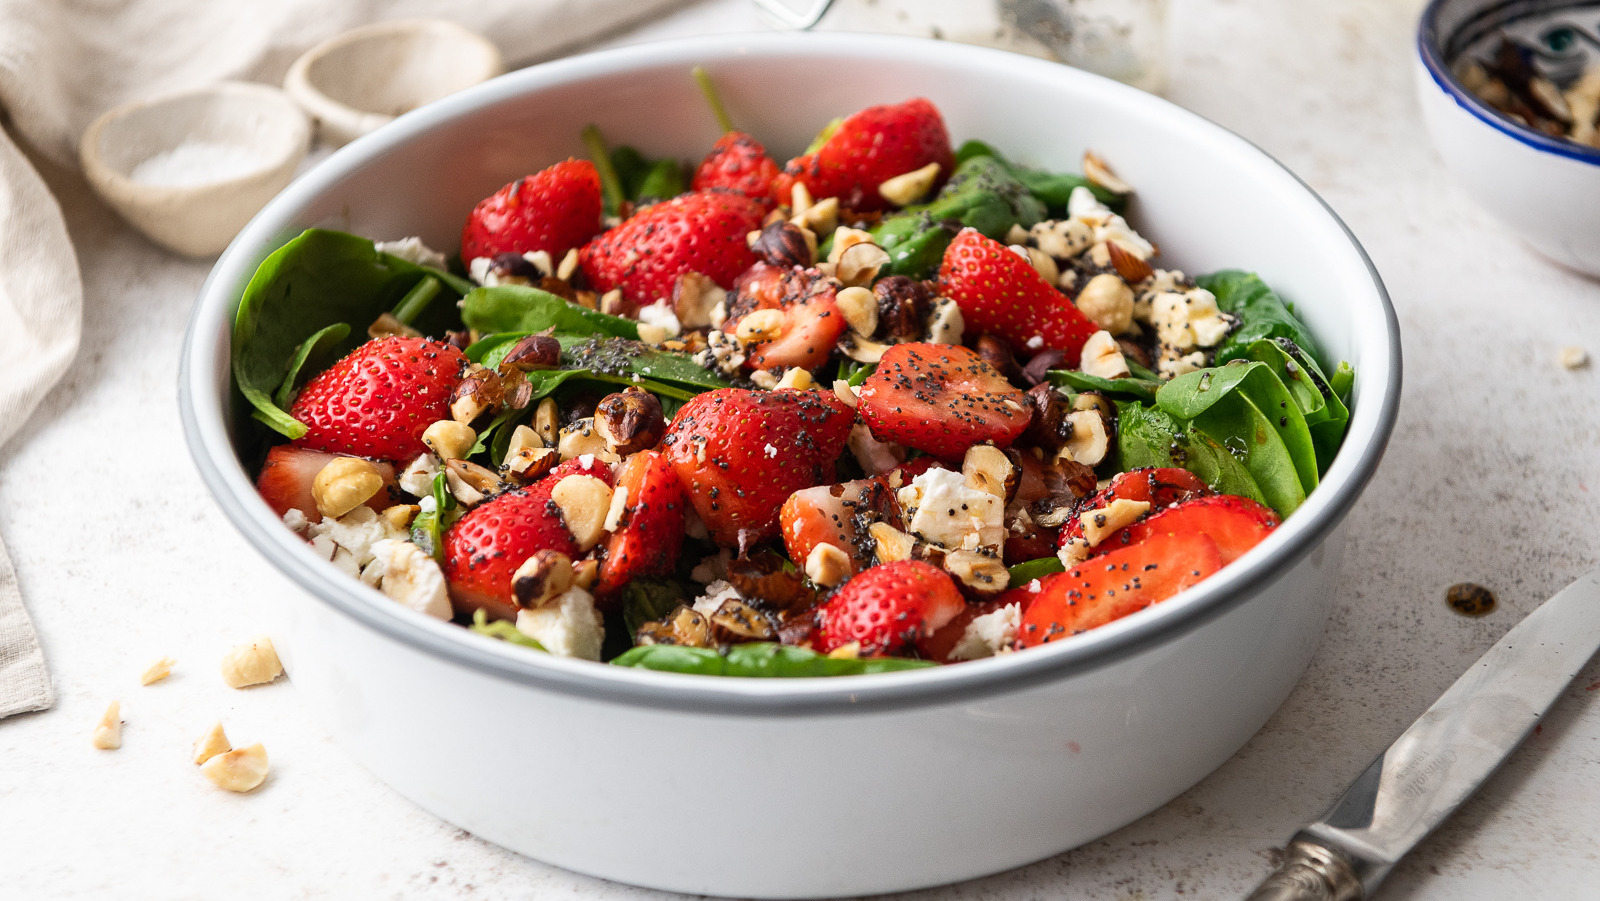 https://www.thedailymeal.com/img/gallery/strawberry-spinach-salad-recipe/l-intro-1664984580.jpg